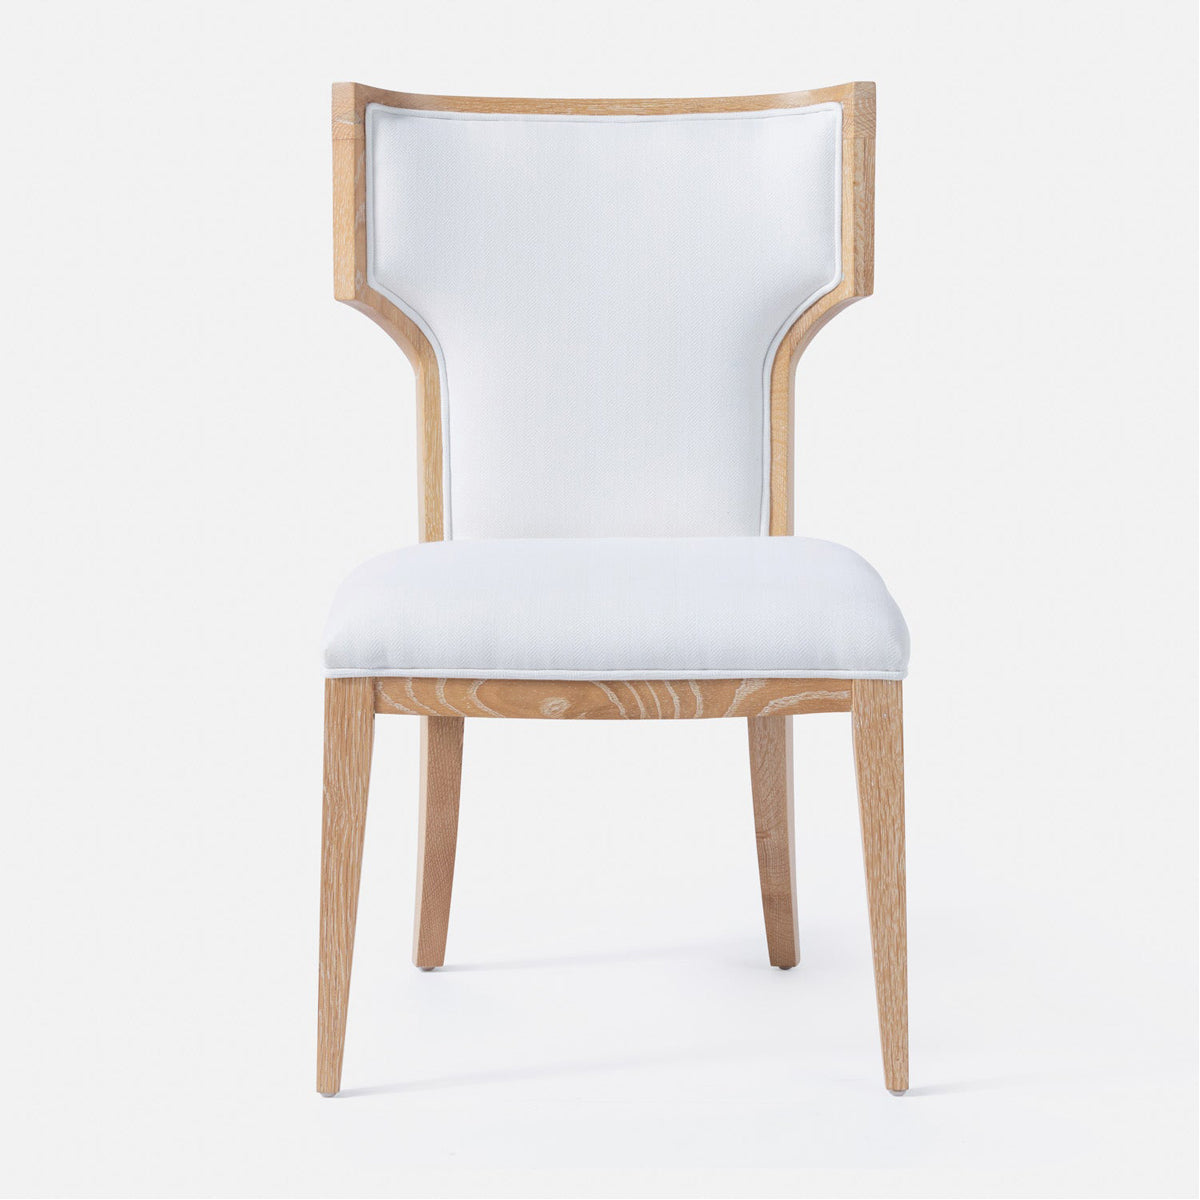 Made Goods Carleen Wingback Dining Chair in Arno Fabric